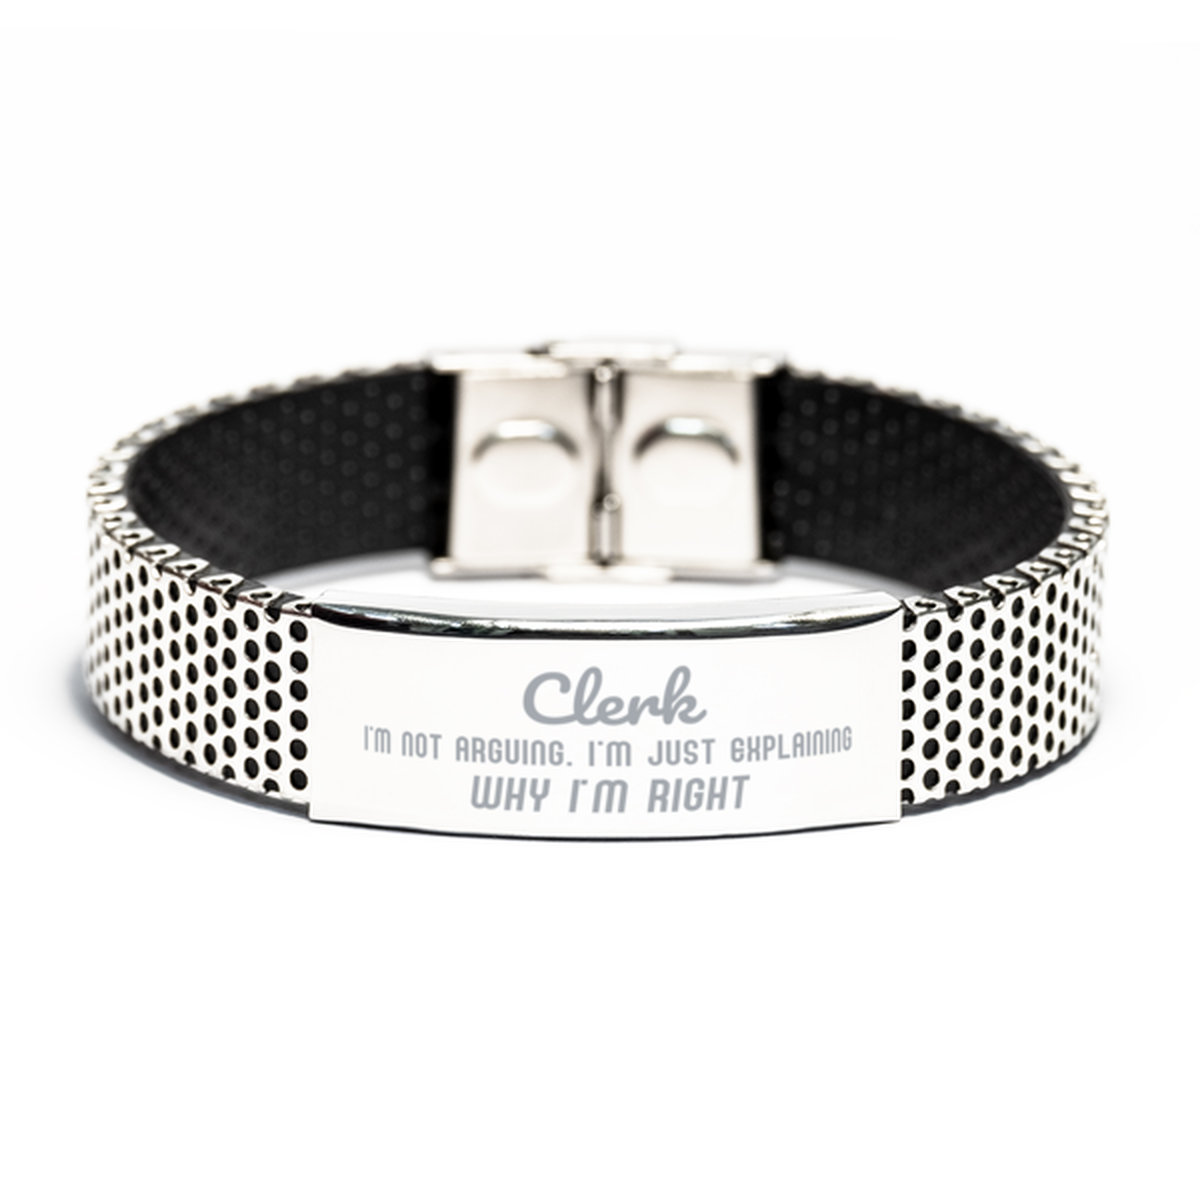 Clerk I'm not Arguing. I'm Just Explaining Why I'm RIGHT Stainless Steel Bracelet, Funny Saying Quote Clerk Gifts For Clerk Graduation Birthday Christmas Gifts for Men Women Coworker